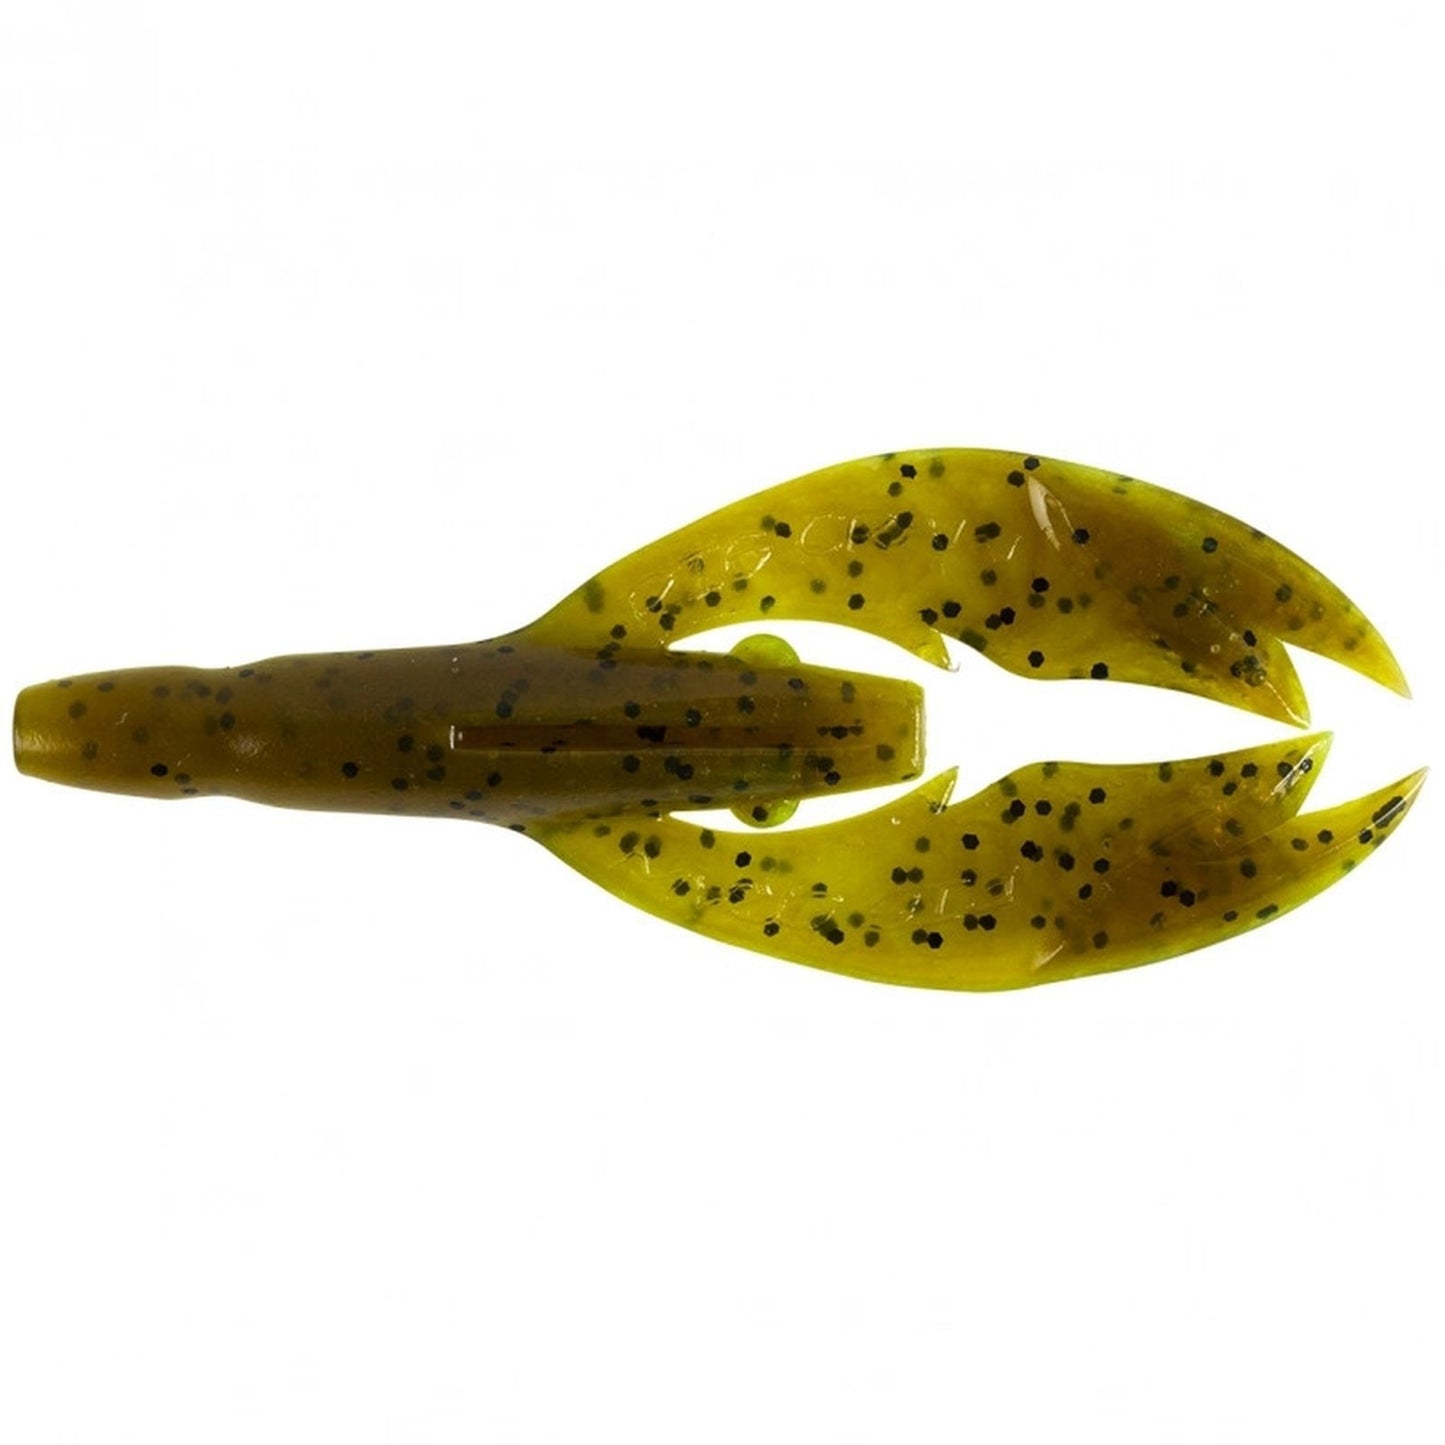 Strike Pro CWC Pig Craw C020 Brown Chartreuse